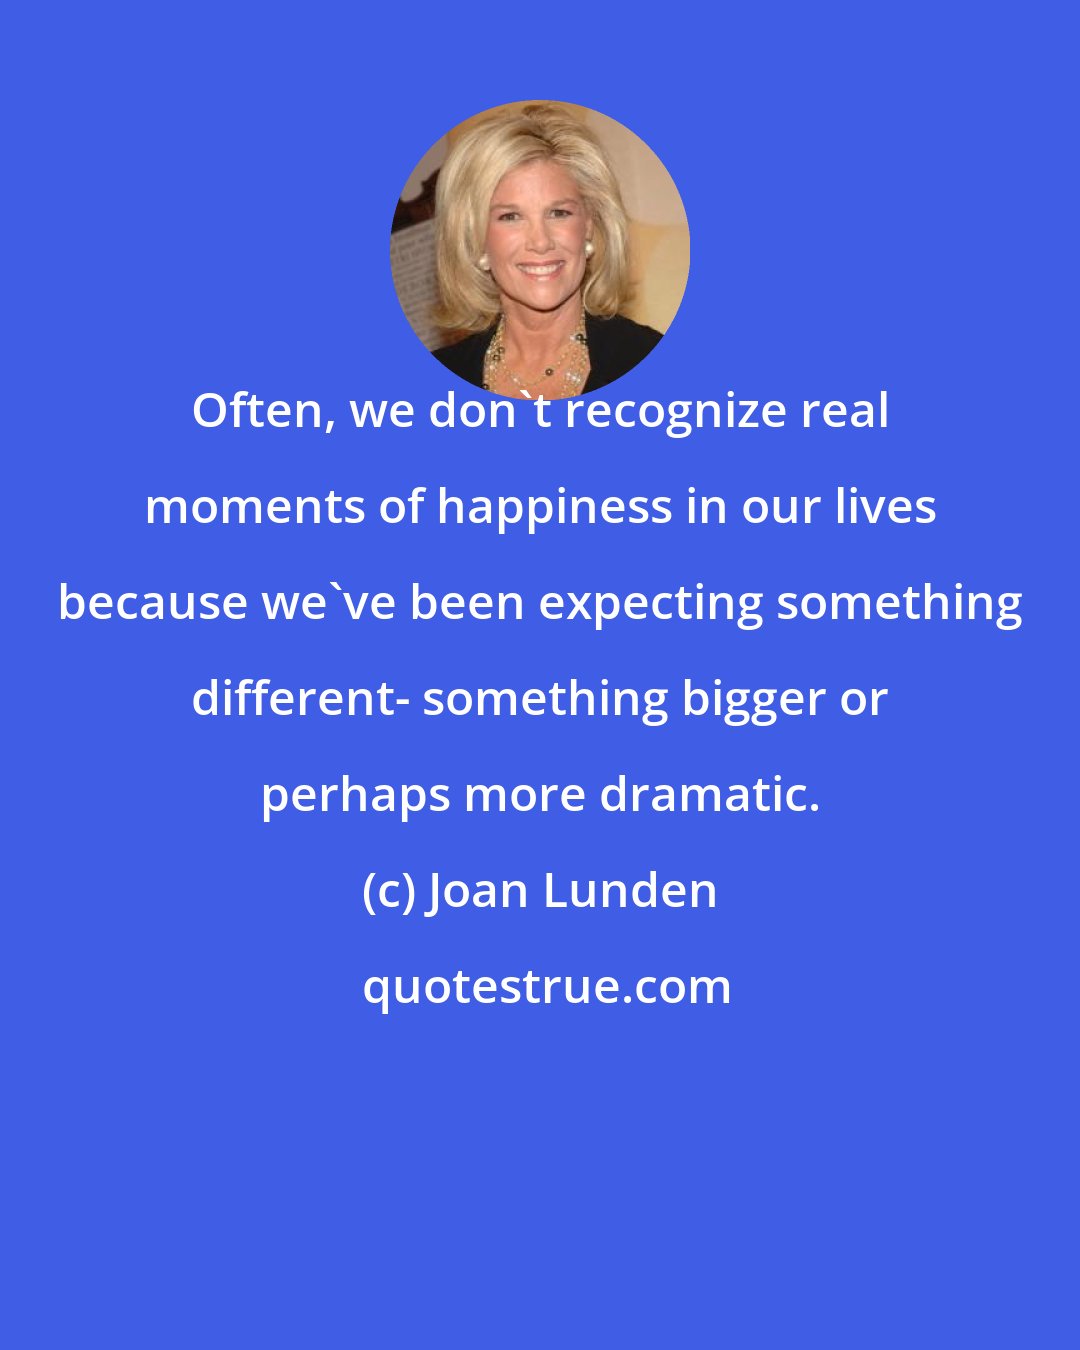 Joan Lunden: Often, we don't recognize real moments of happiness in our lives because we've been expecting something different- something bigger or perhaps more dramatic.